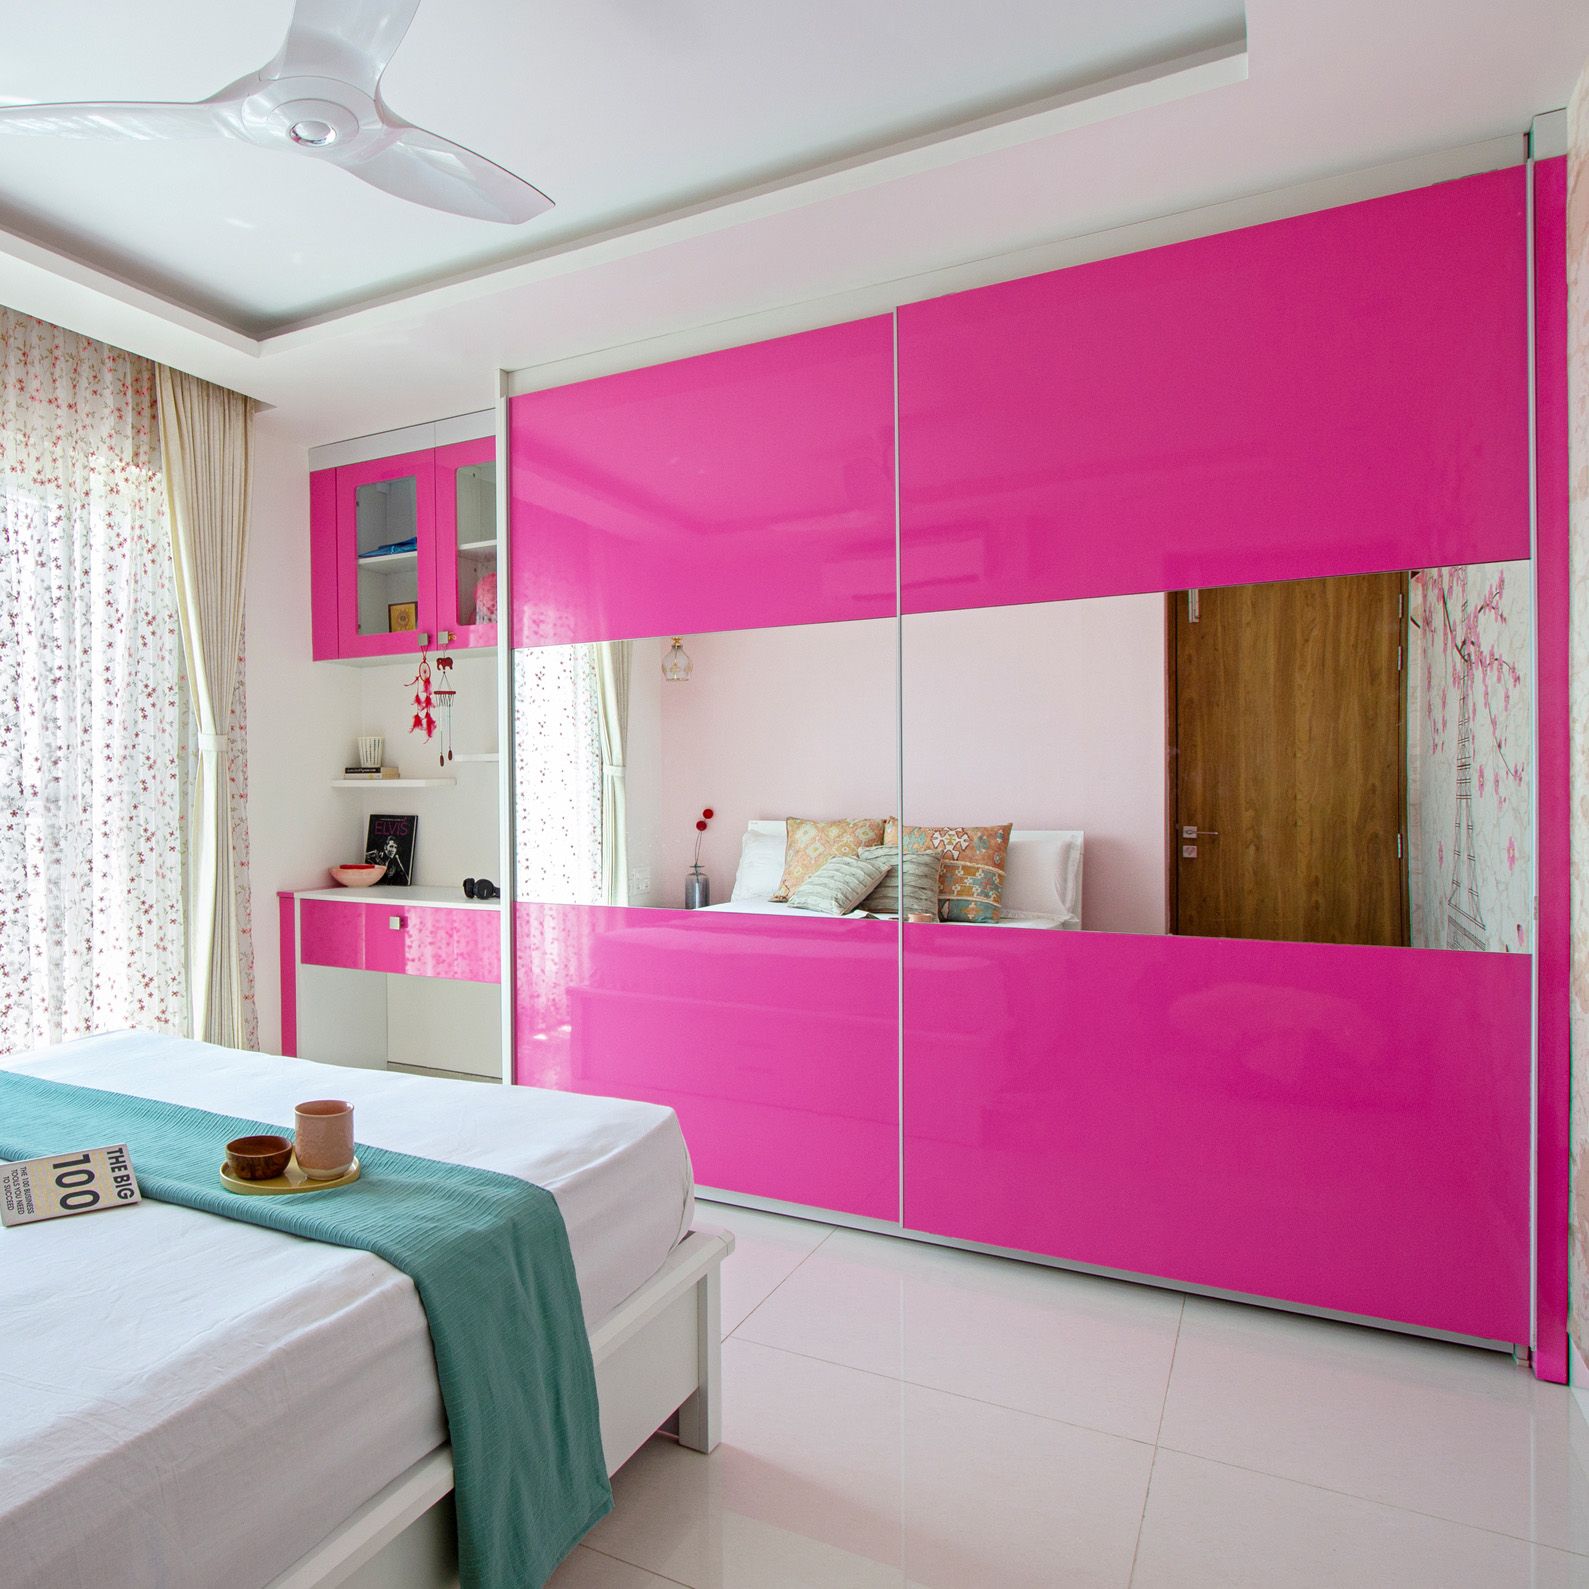 Contemporary Persian Pink Sliding Door Wardrobe With Mirror And Study Table